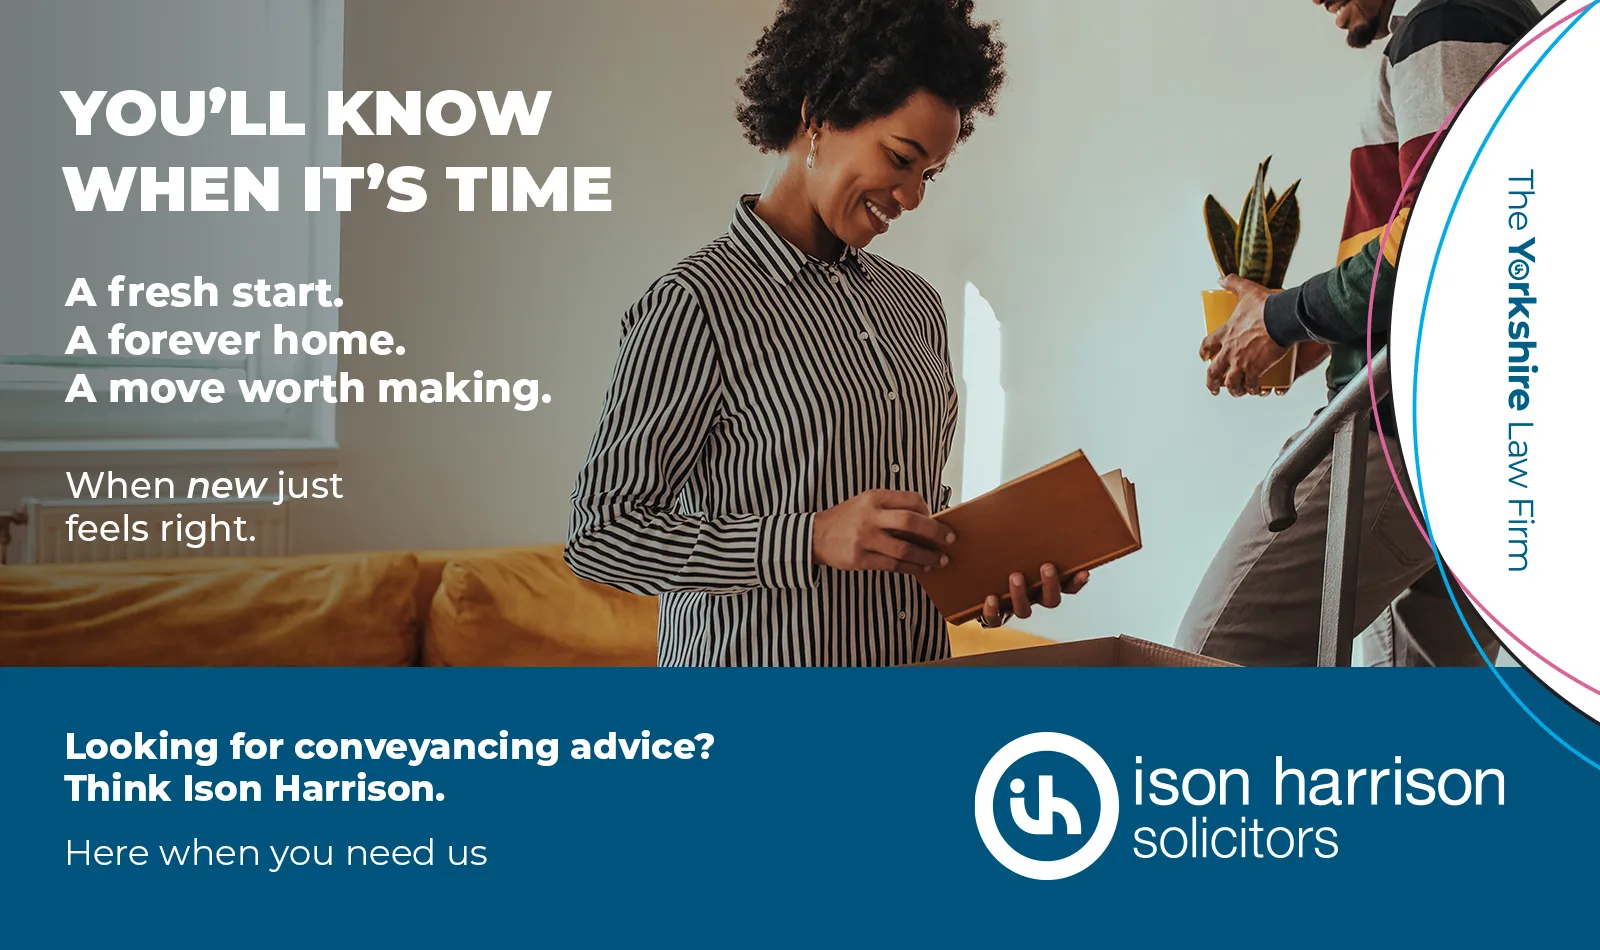 You know when it's time - conveyancing